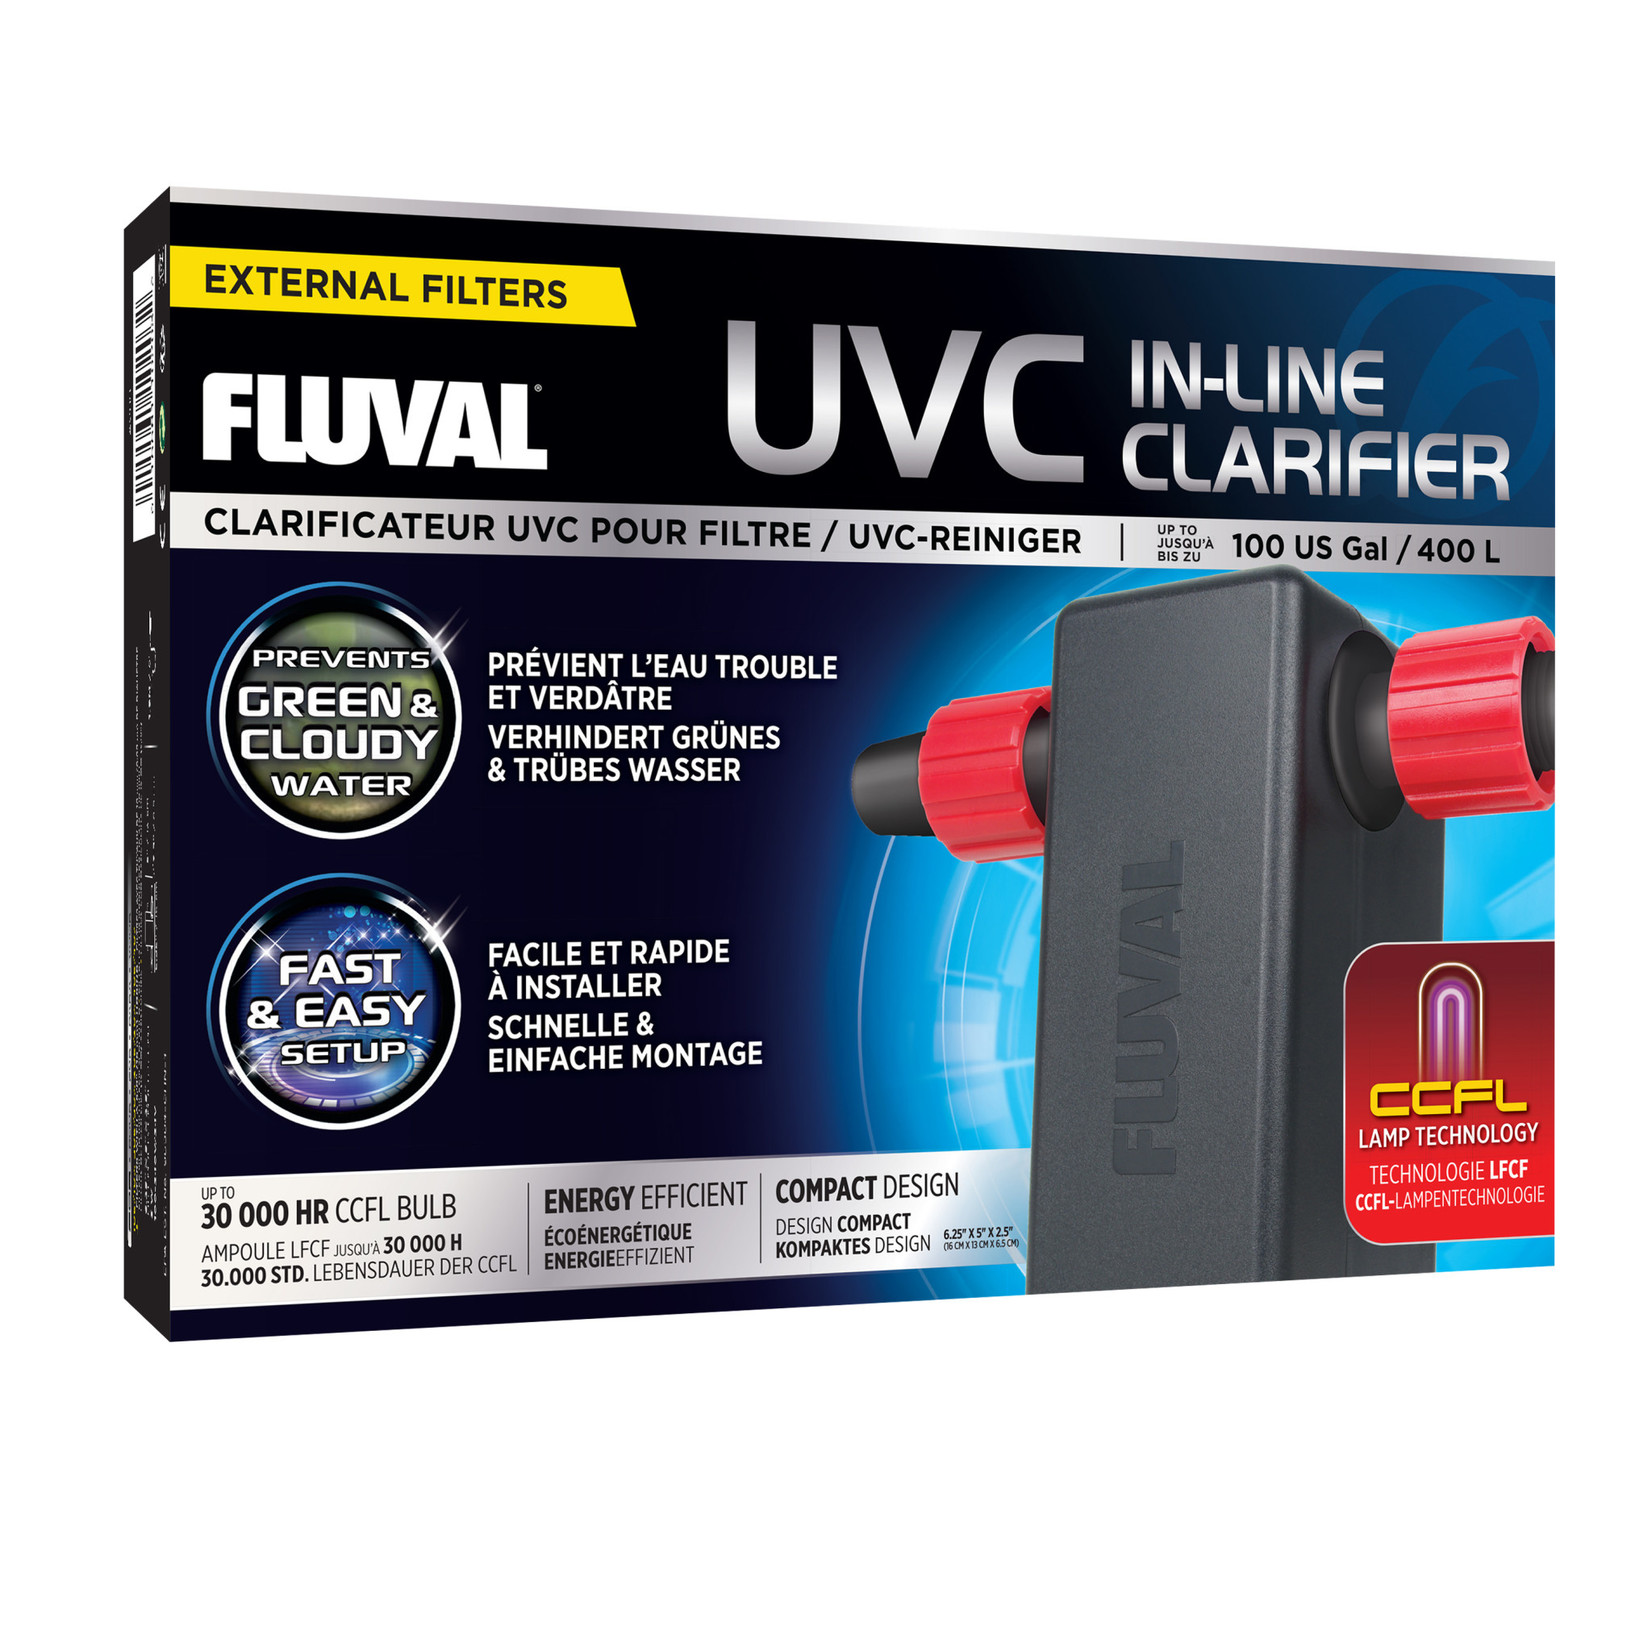 FLUVAL Fluval UVC In-Line Clarifier - up to 100 US Gal (400 L)